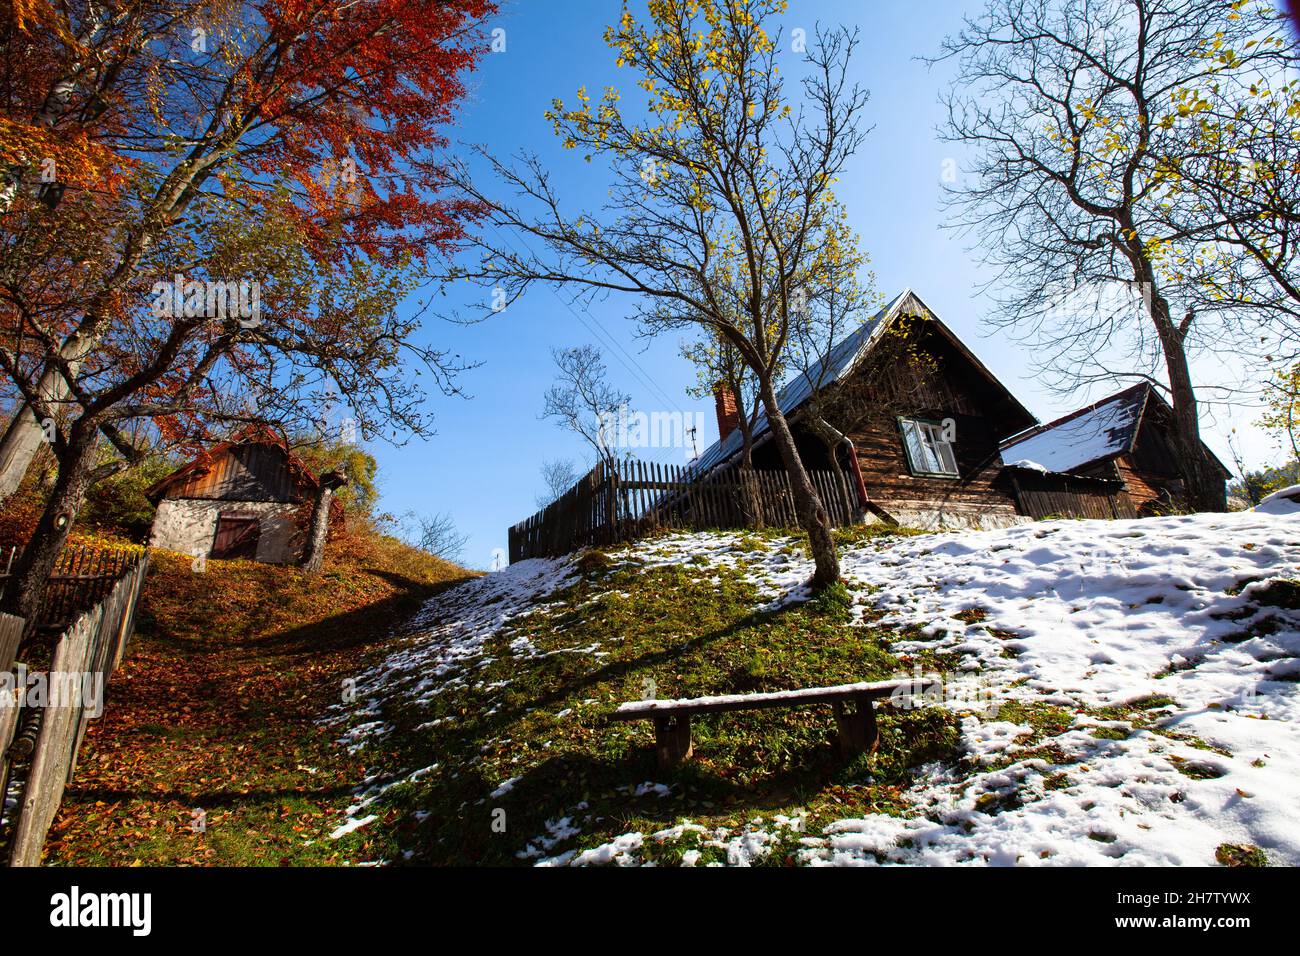 log cabin in a secluded location with old fruit trees, autumn weather in the mountains Stock Photo